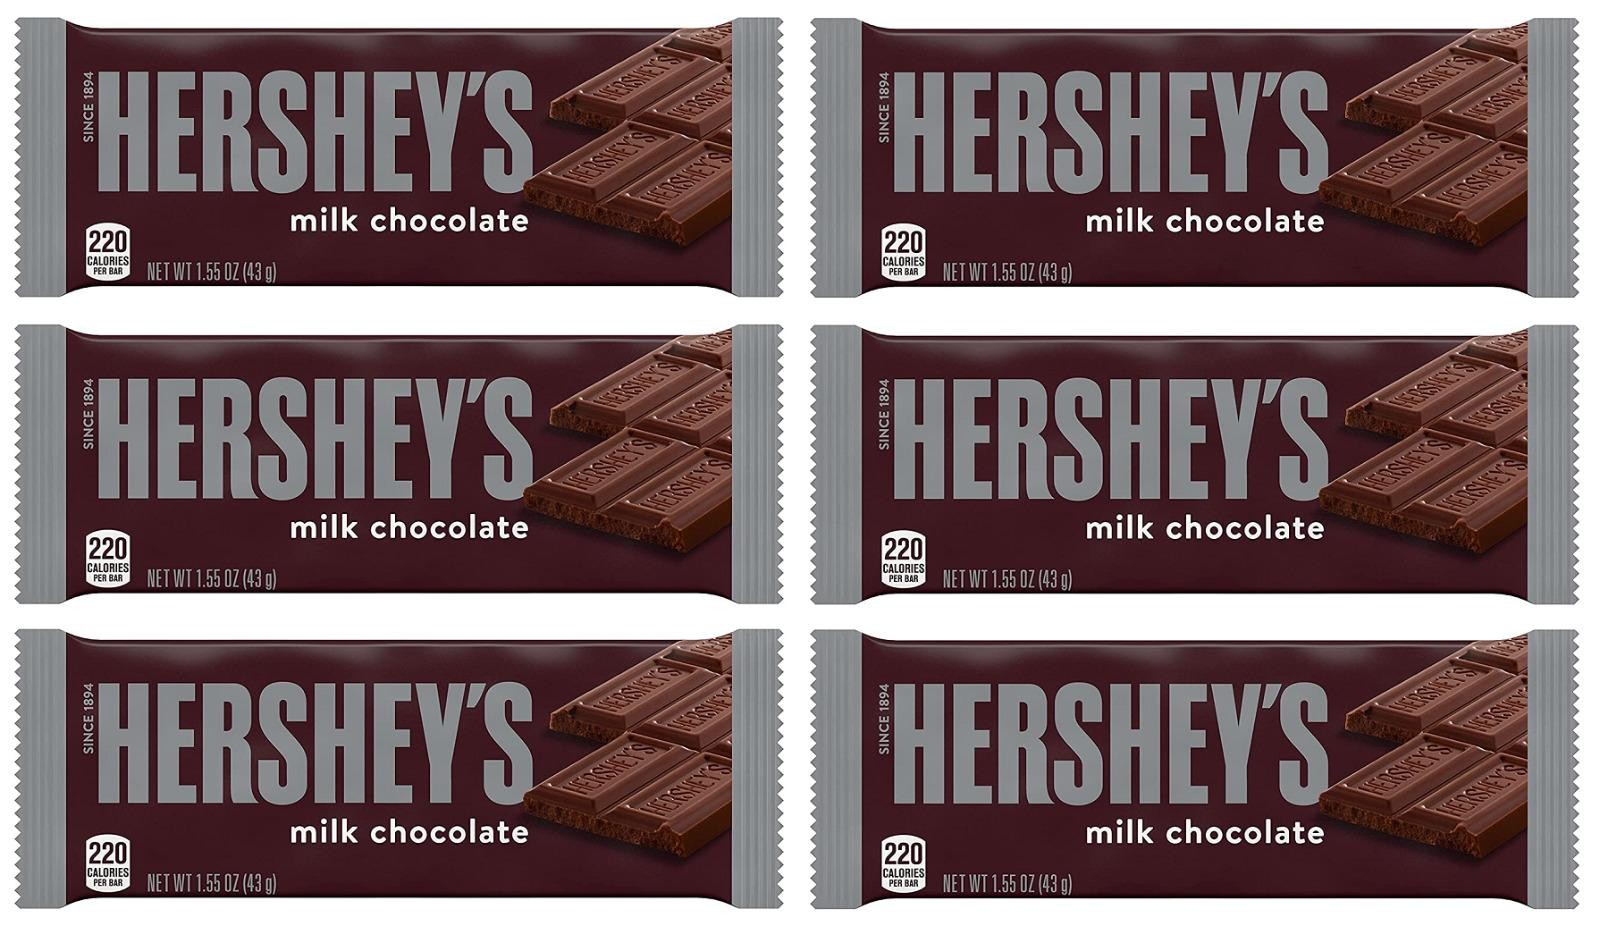 Hershey's Milk Chocolate Candy Bars, Bulk Candy, 1.55 Oz. (Choose from: 6 or 12)